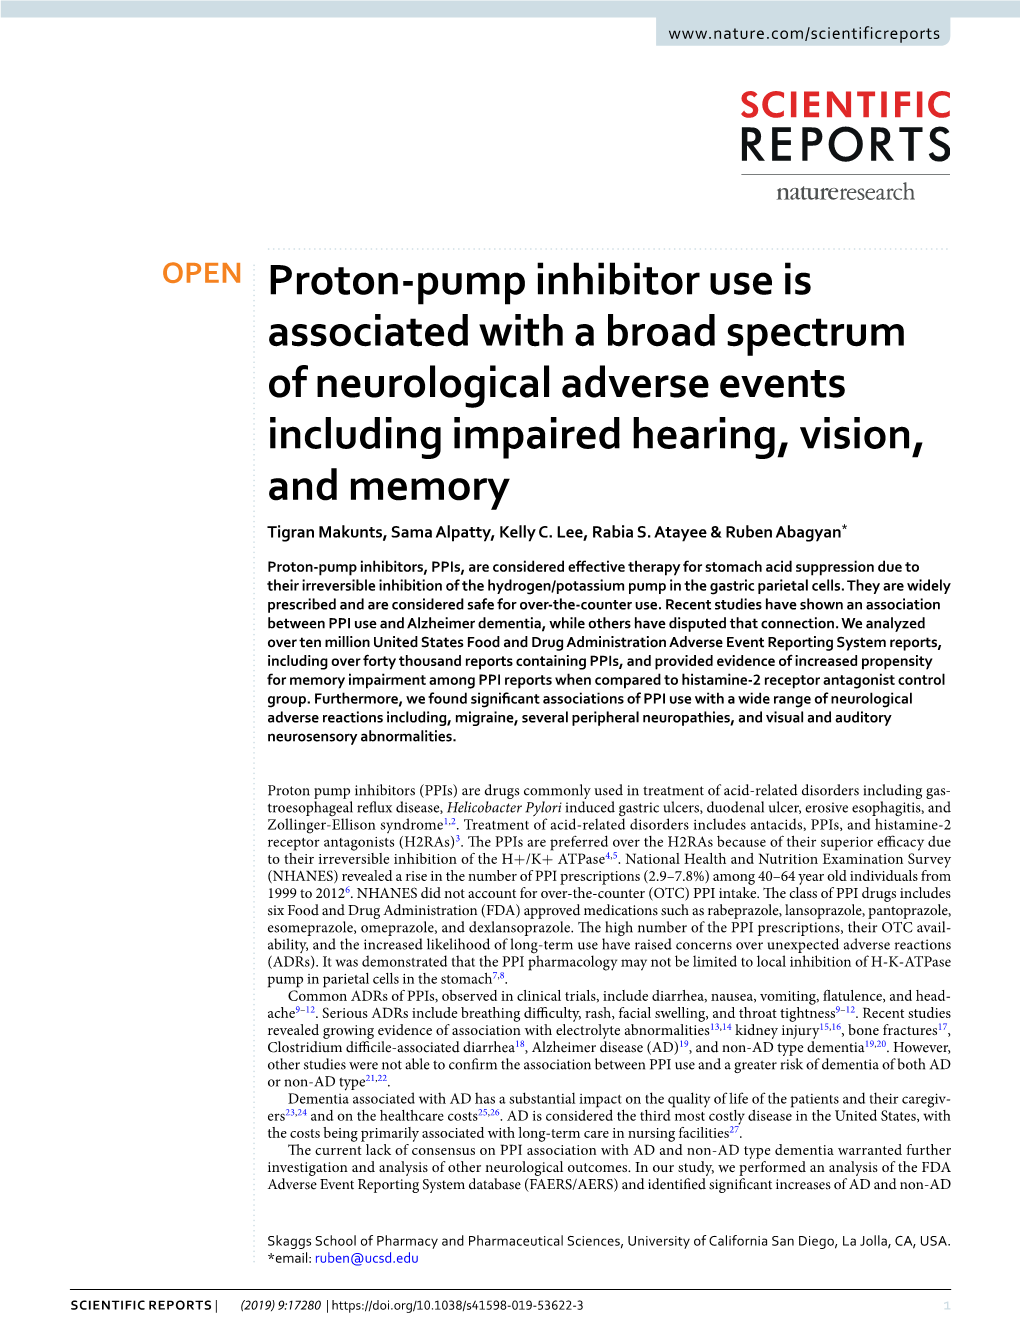 Proton-Pump Inhibitor Use Is Associated with a Broad Spectrum Of